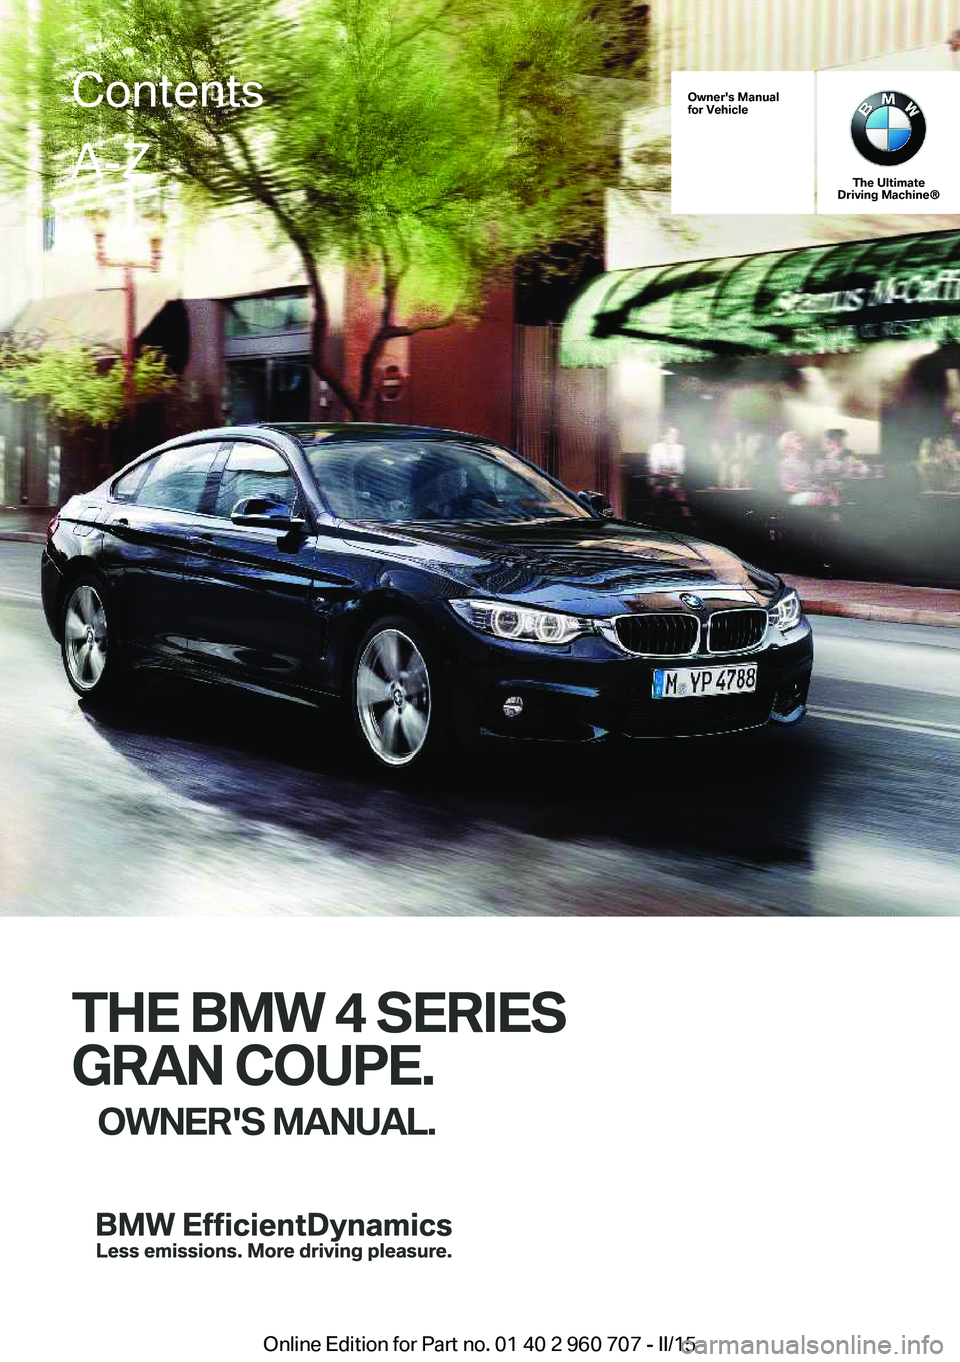 BMW 435I XDRIVE GRAN COUPE 2016  Owners Manual Owner's Manual
for Vehicle
The Ultimate
Driving Machine®
THE BMW 4 SERIES
GRAN COUPE. OWNER'S MANUAL.
ContentsA-Z
Online Edition for Part no. 01 40 2 960 707 - II/15   